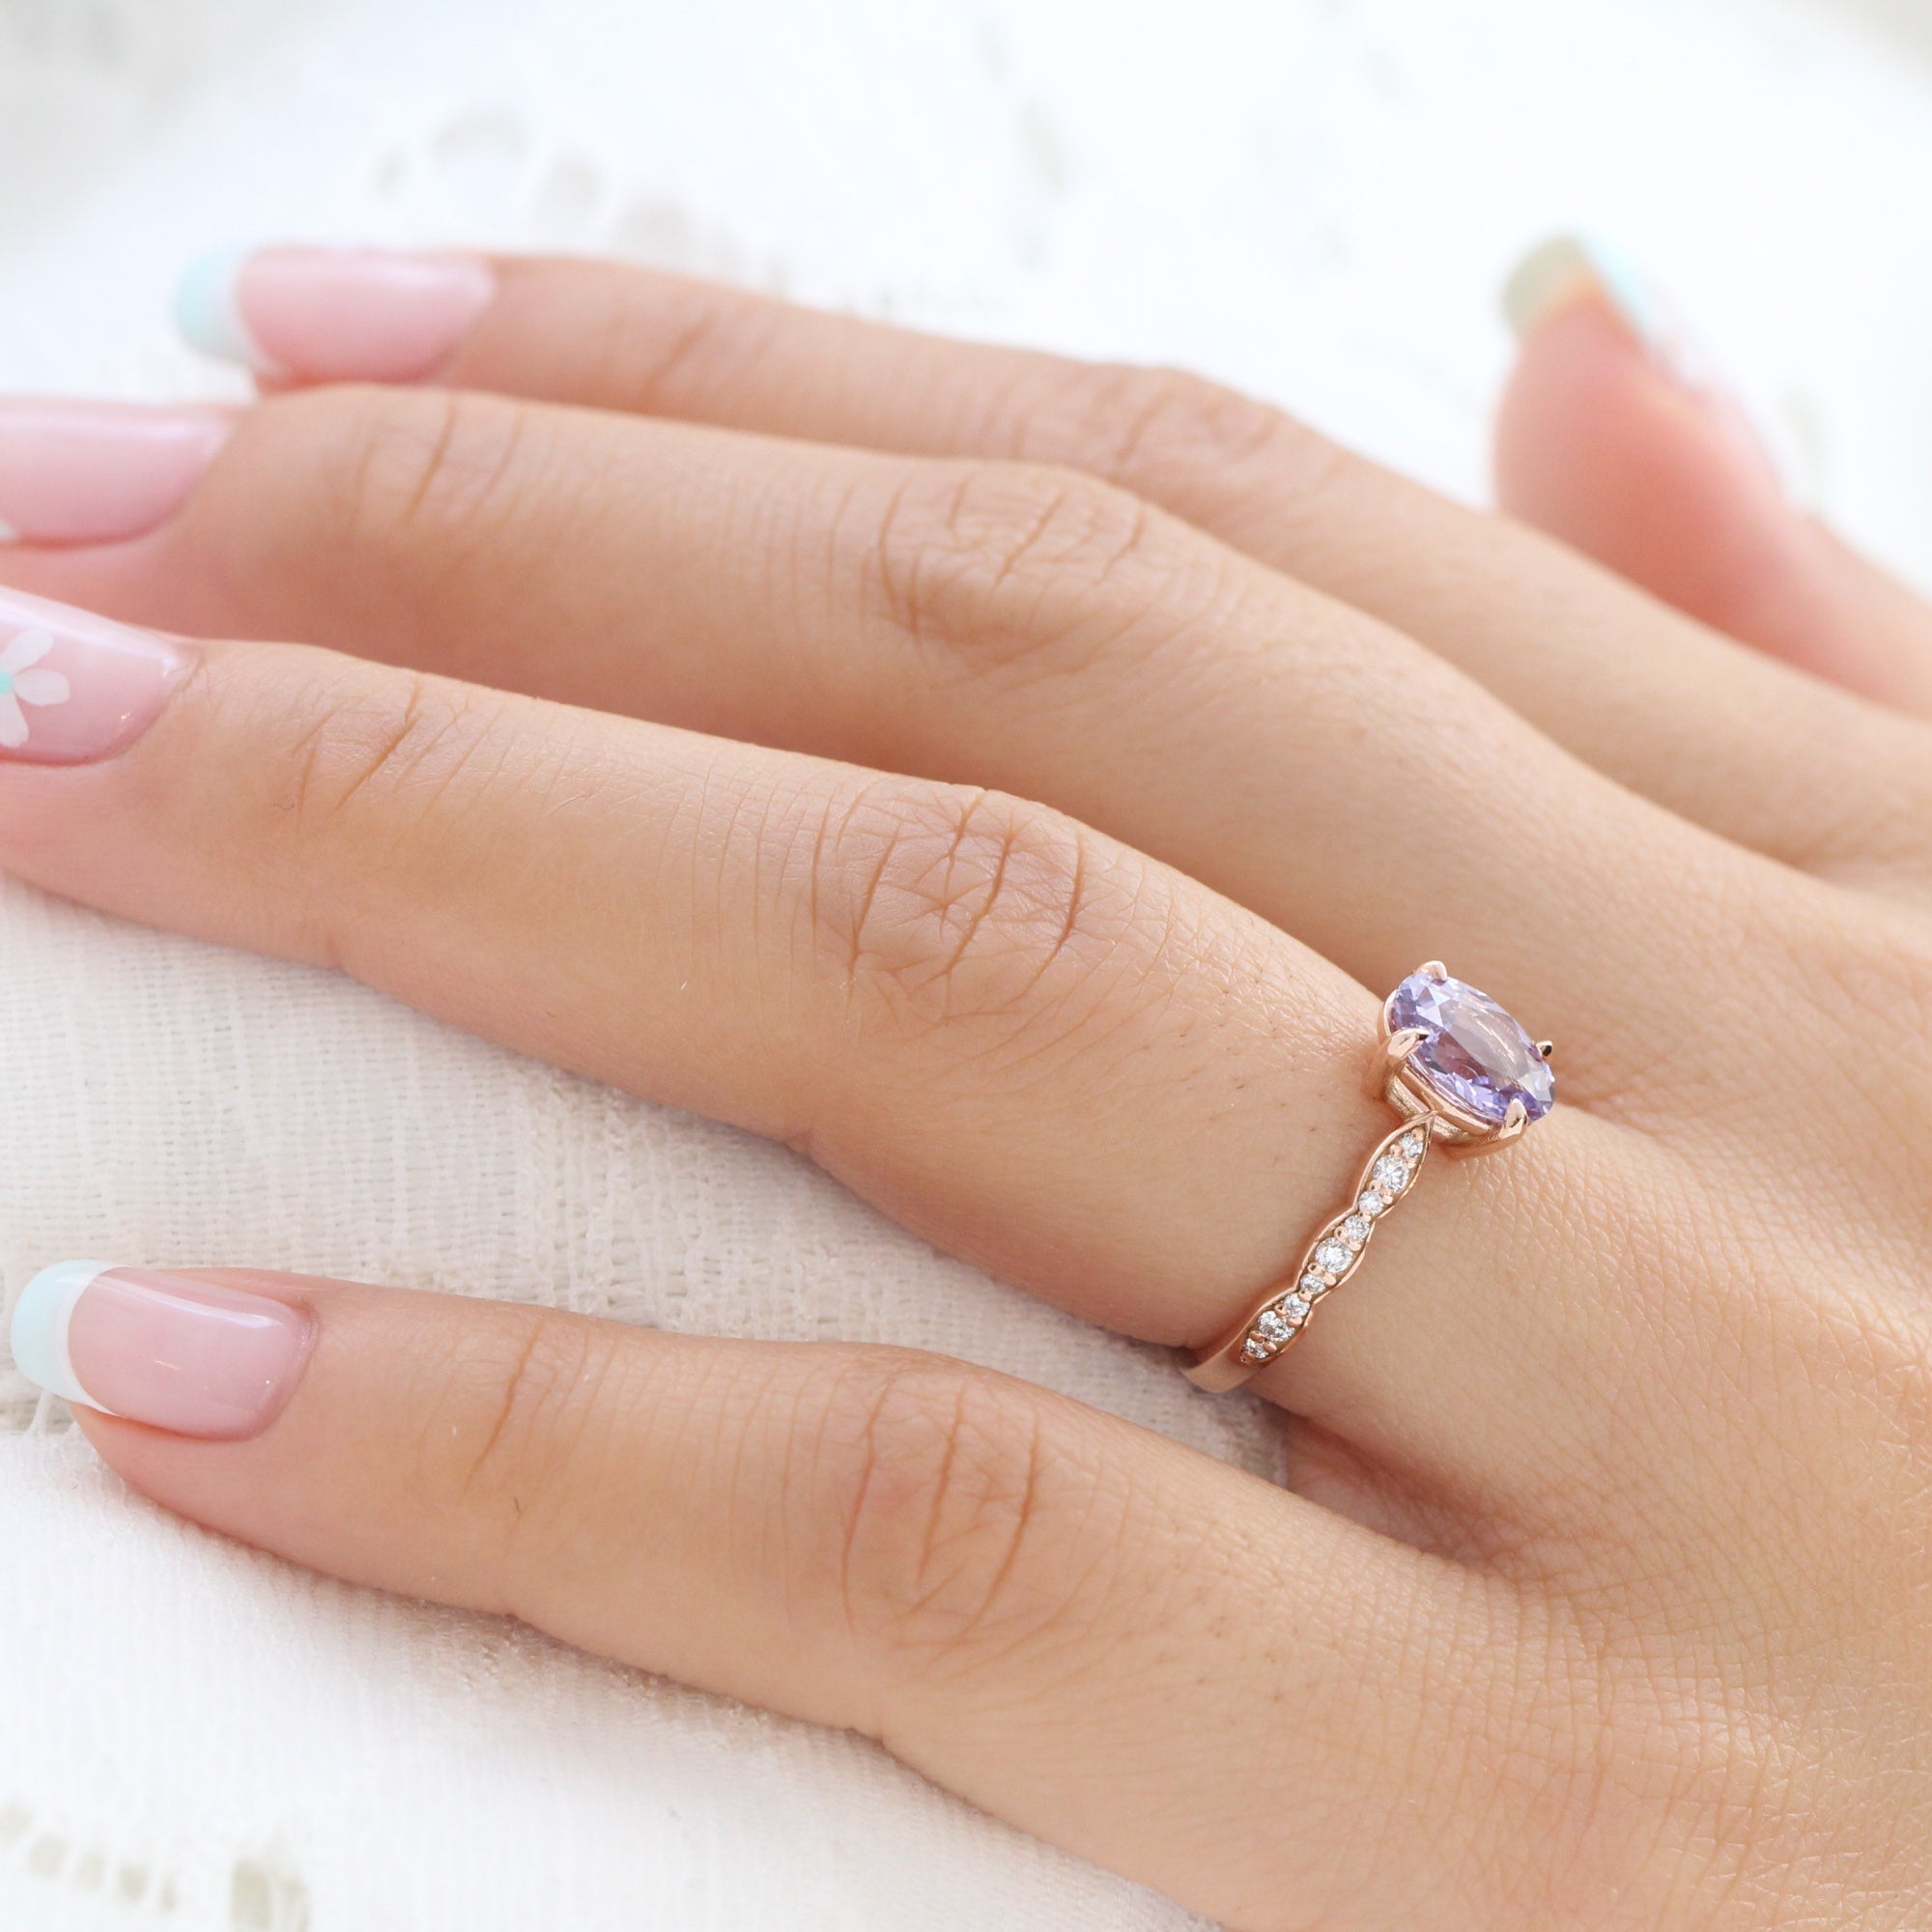 Oval lavender sapphire ring rose gold scalloped diamond band low set engagement ring la more design jewelry